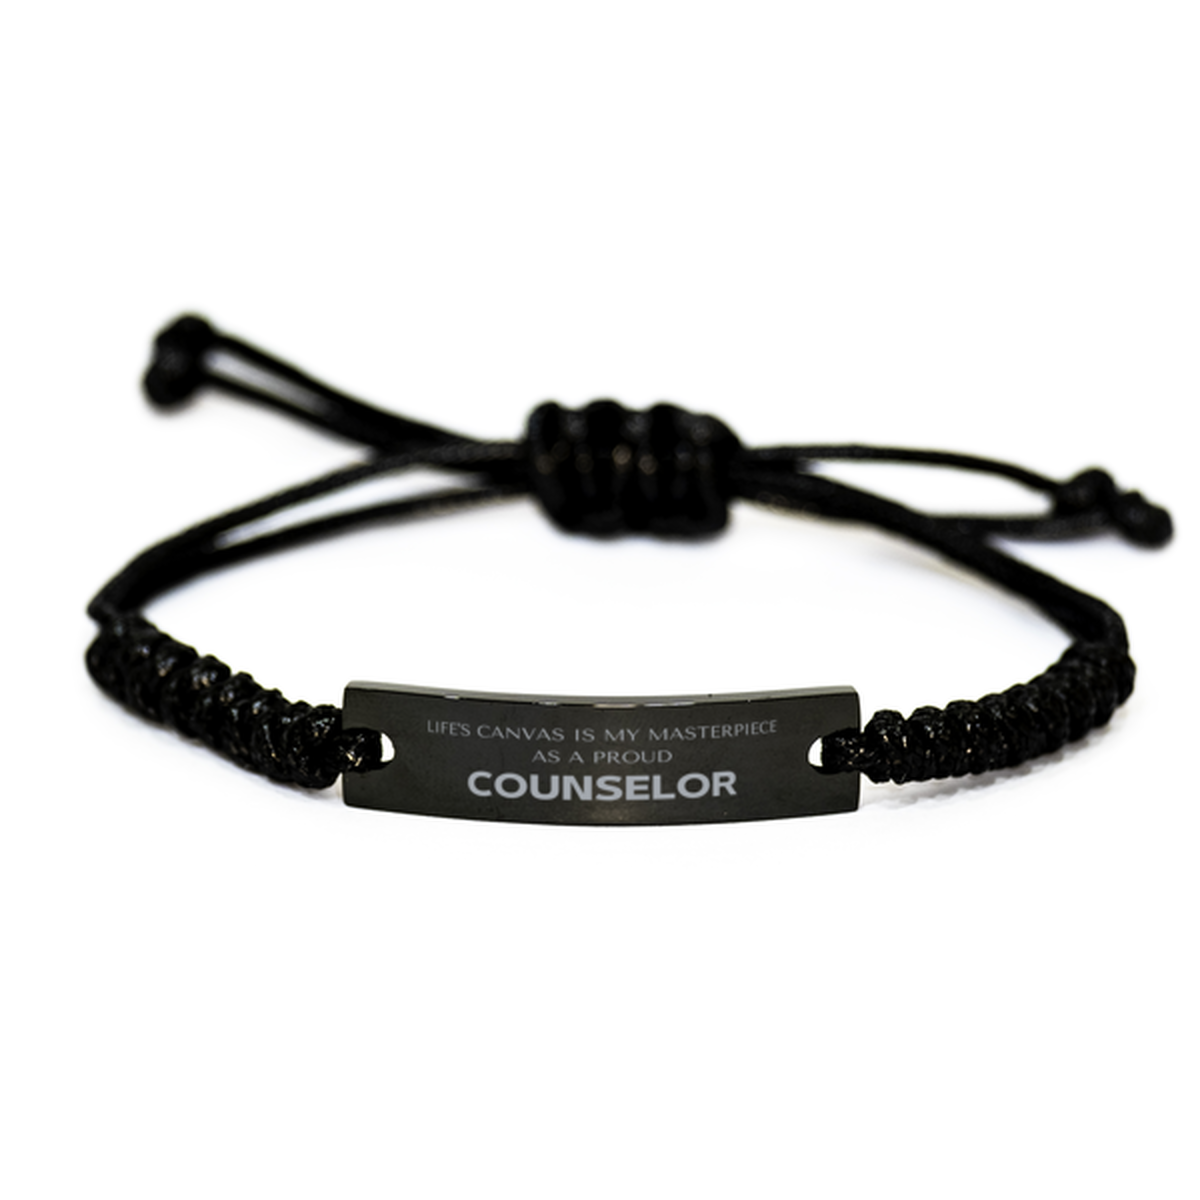 Proud Counselor Gifts, Life's canvas is my masterpiece, Epic Birthday Christmas Unique Black Rope Bracelet For Counselor, Coworkers, Men, Women, Friends